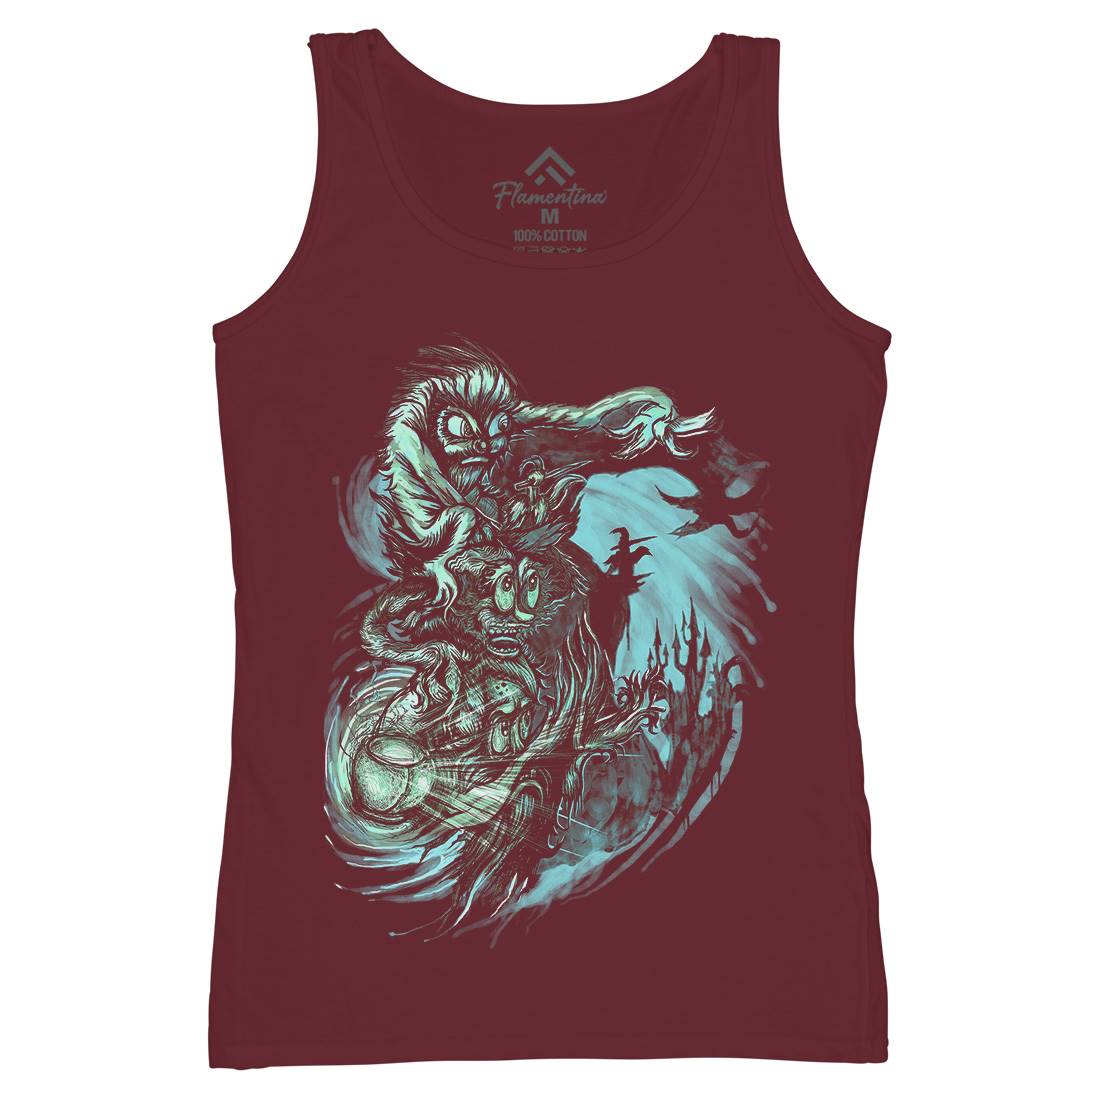 Playing With Shadows Womens Organic Tank Top Vest Horror D077